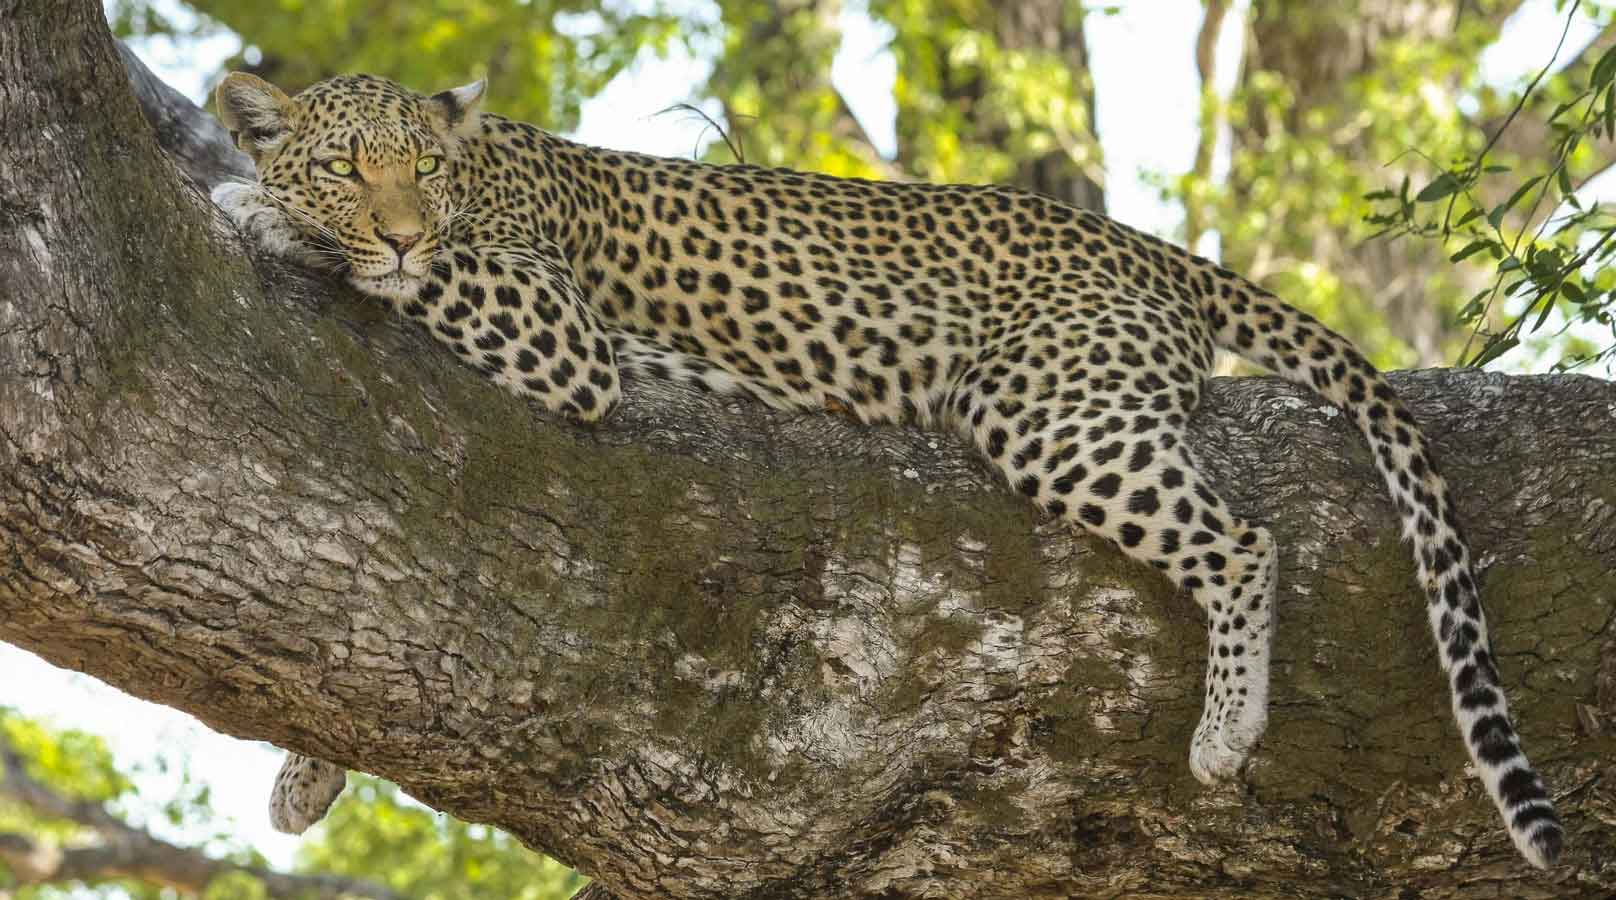 A leopard relaxing on a tree